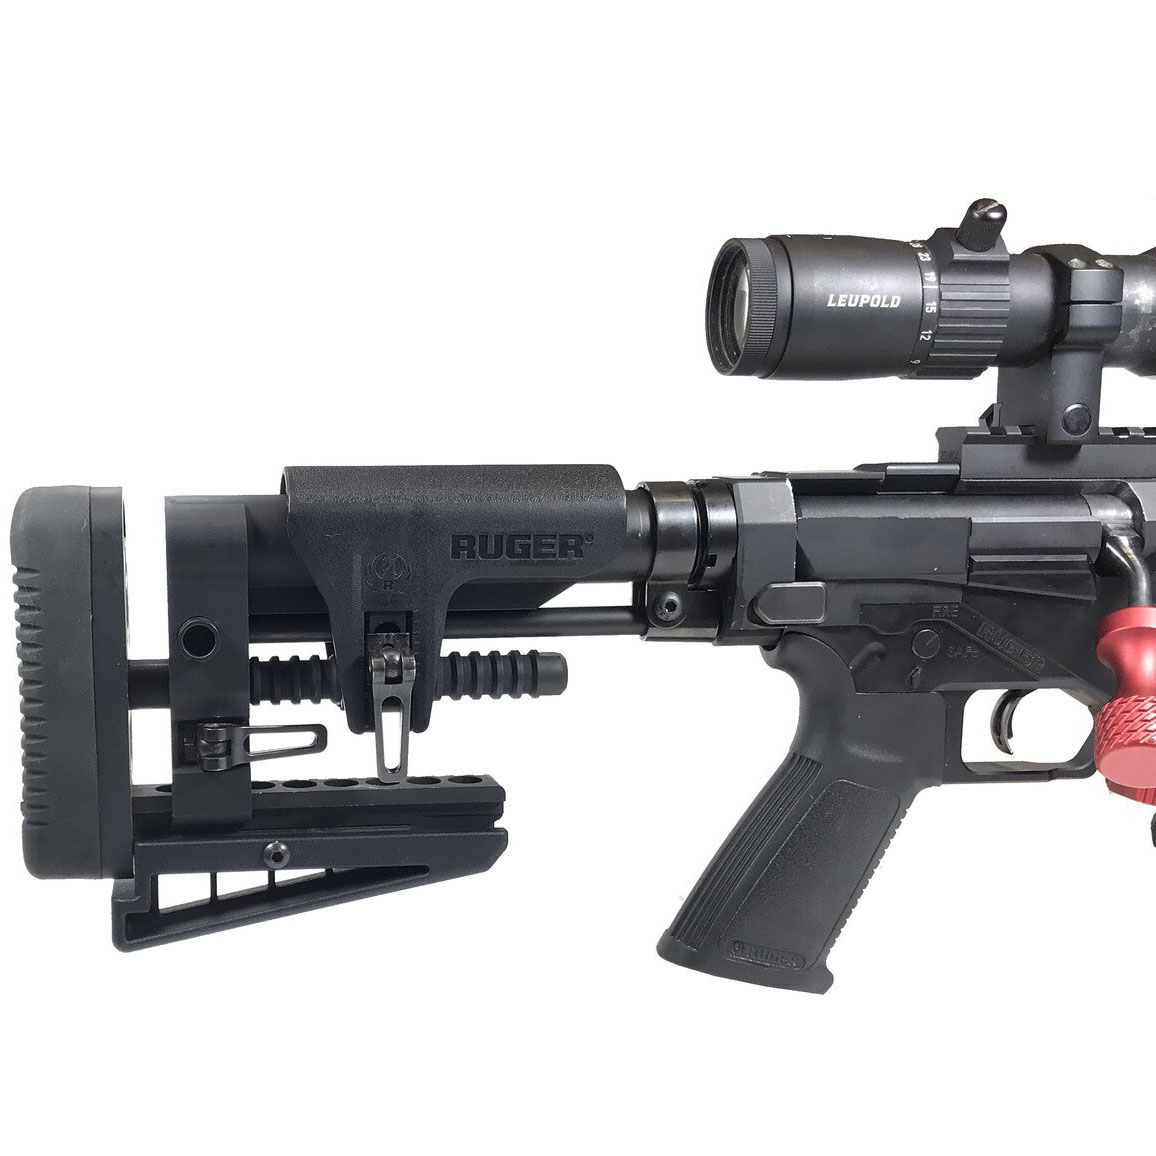 Do you think this could work (fit) on the picatinny area on a Magpul PRS stock?